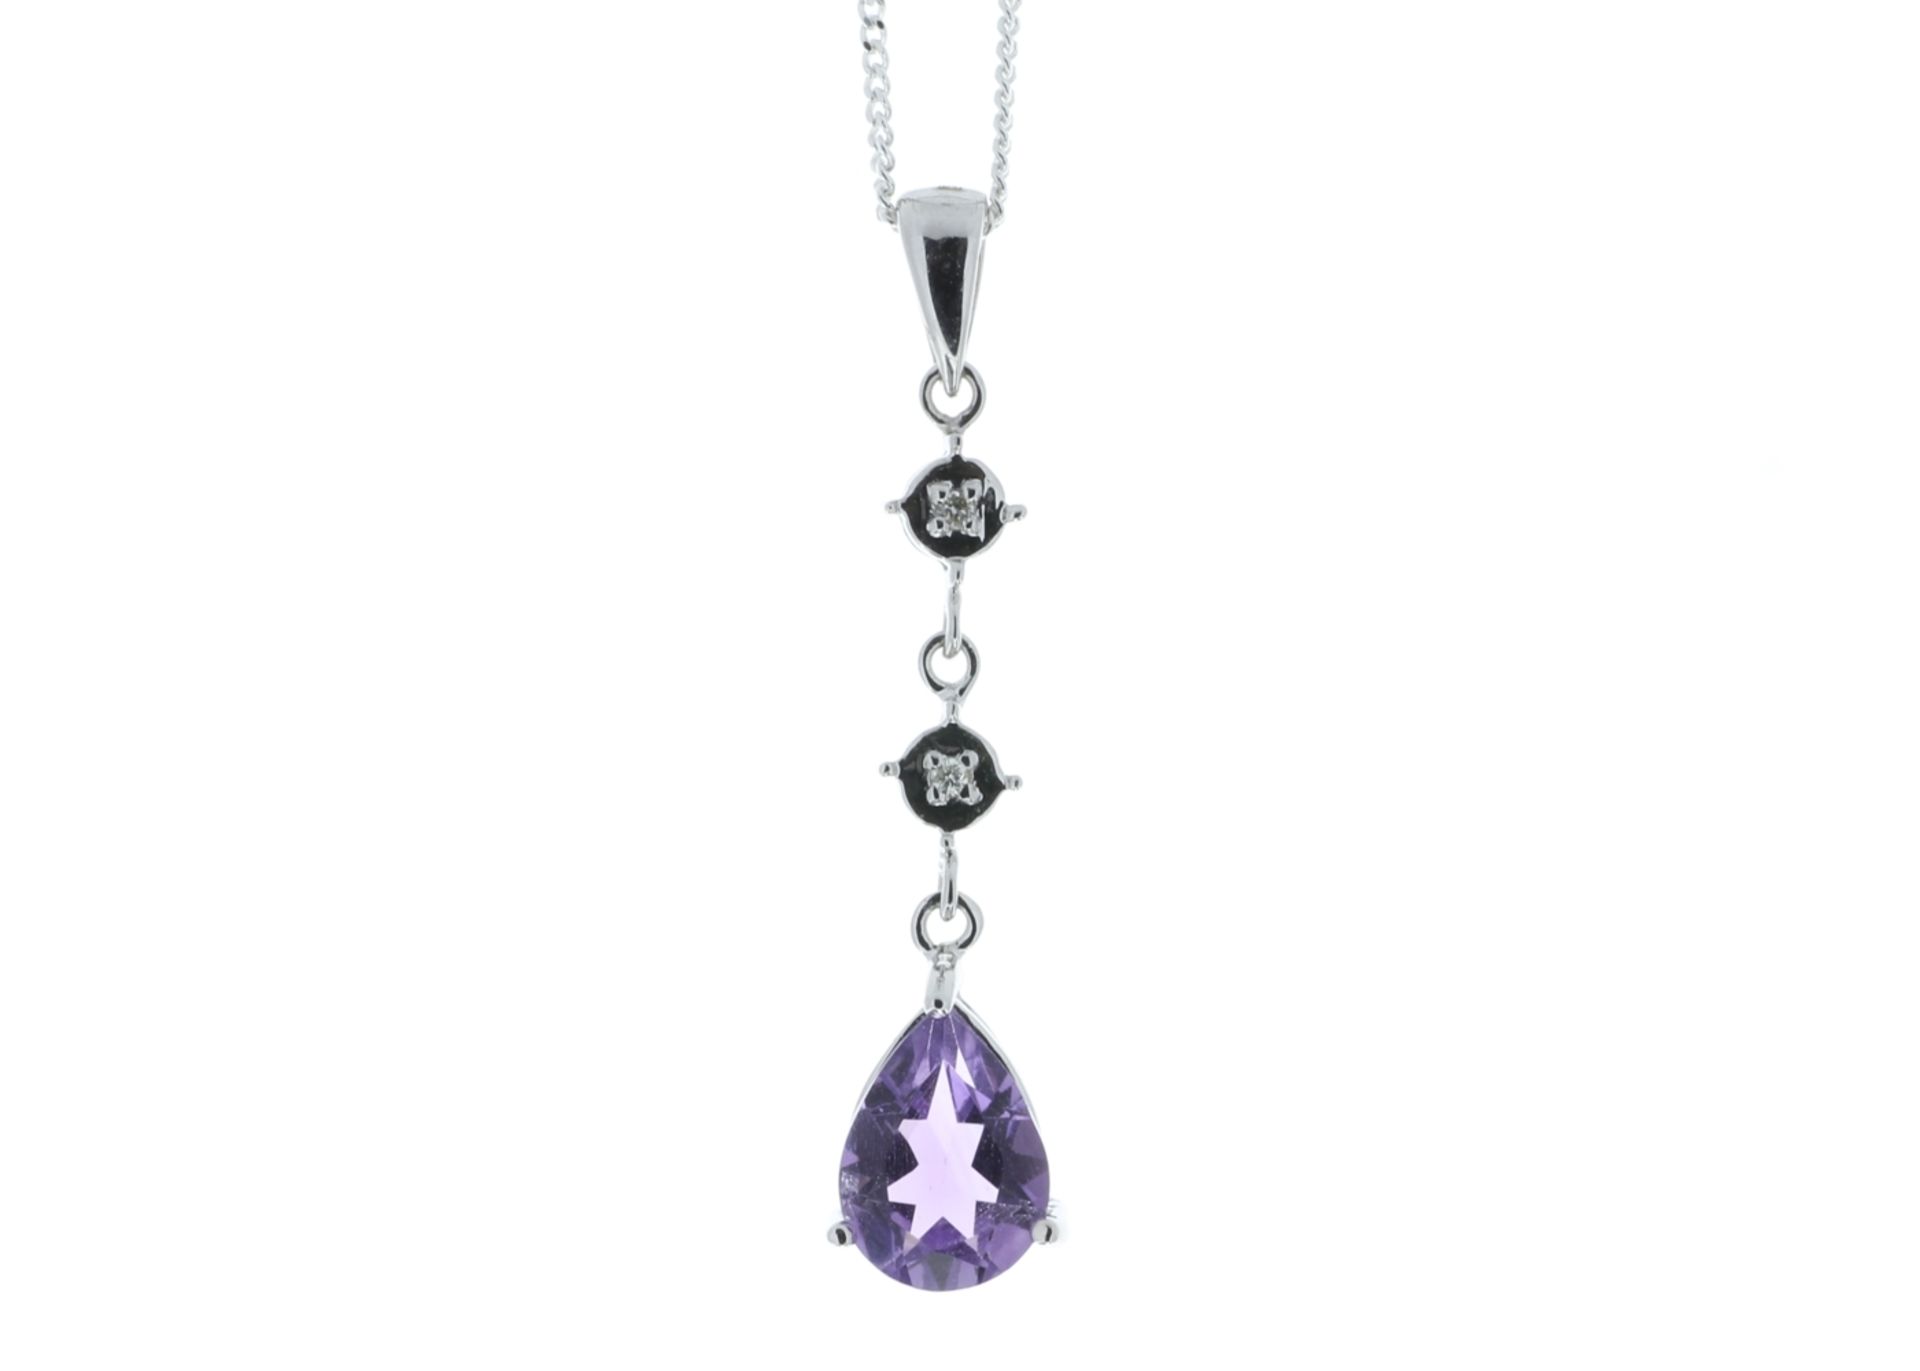 9ct White Gold Amethyst And Diamond Pendant 0.01 Carats - Valued by GIE £560.00 - This is classic